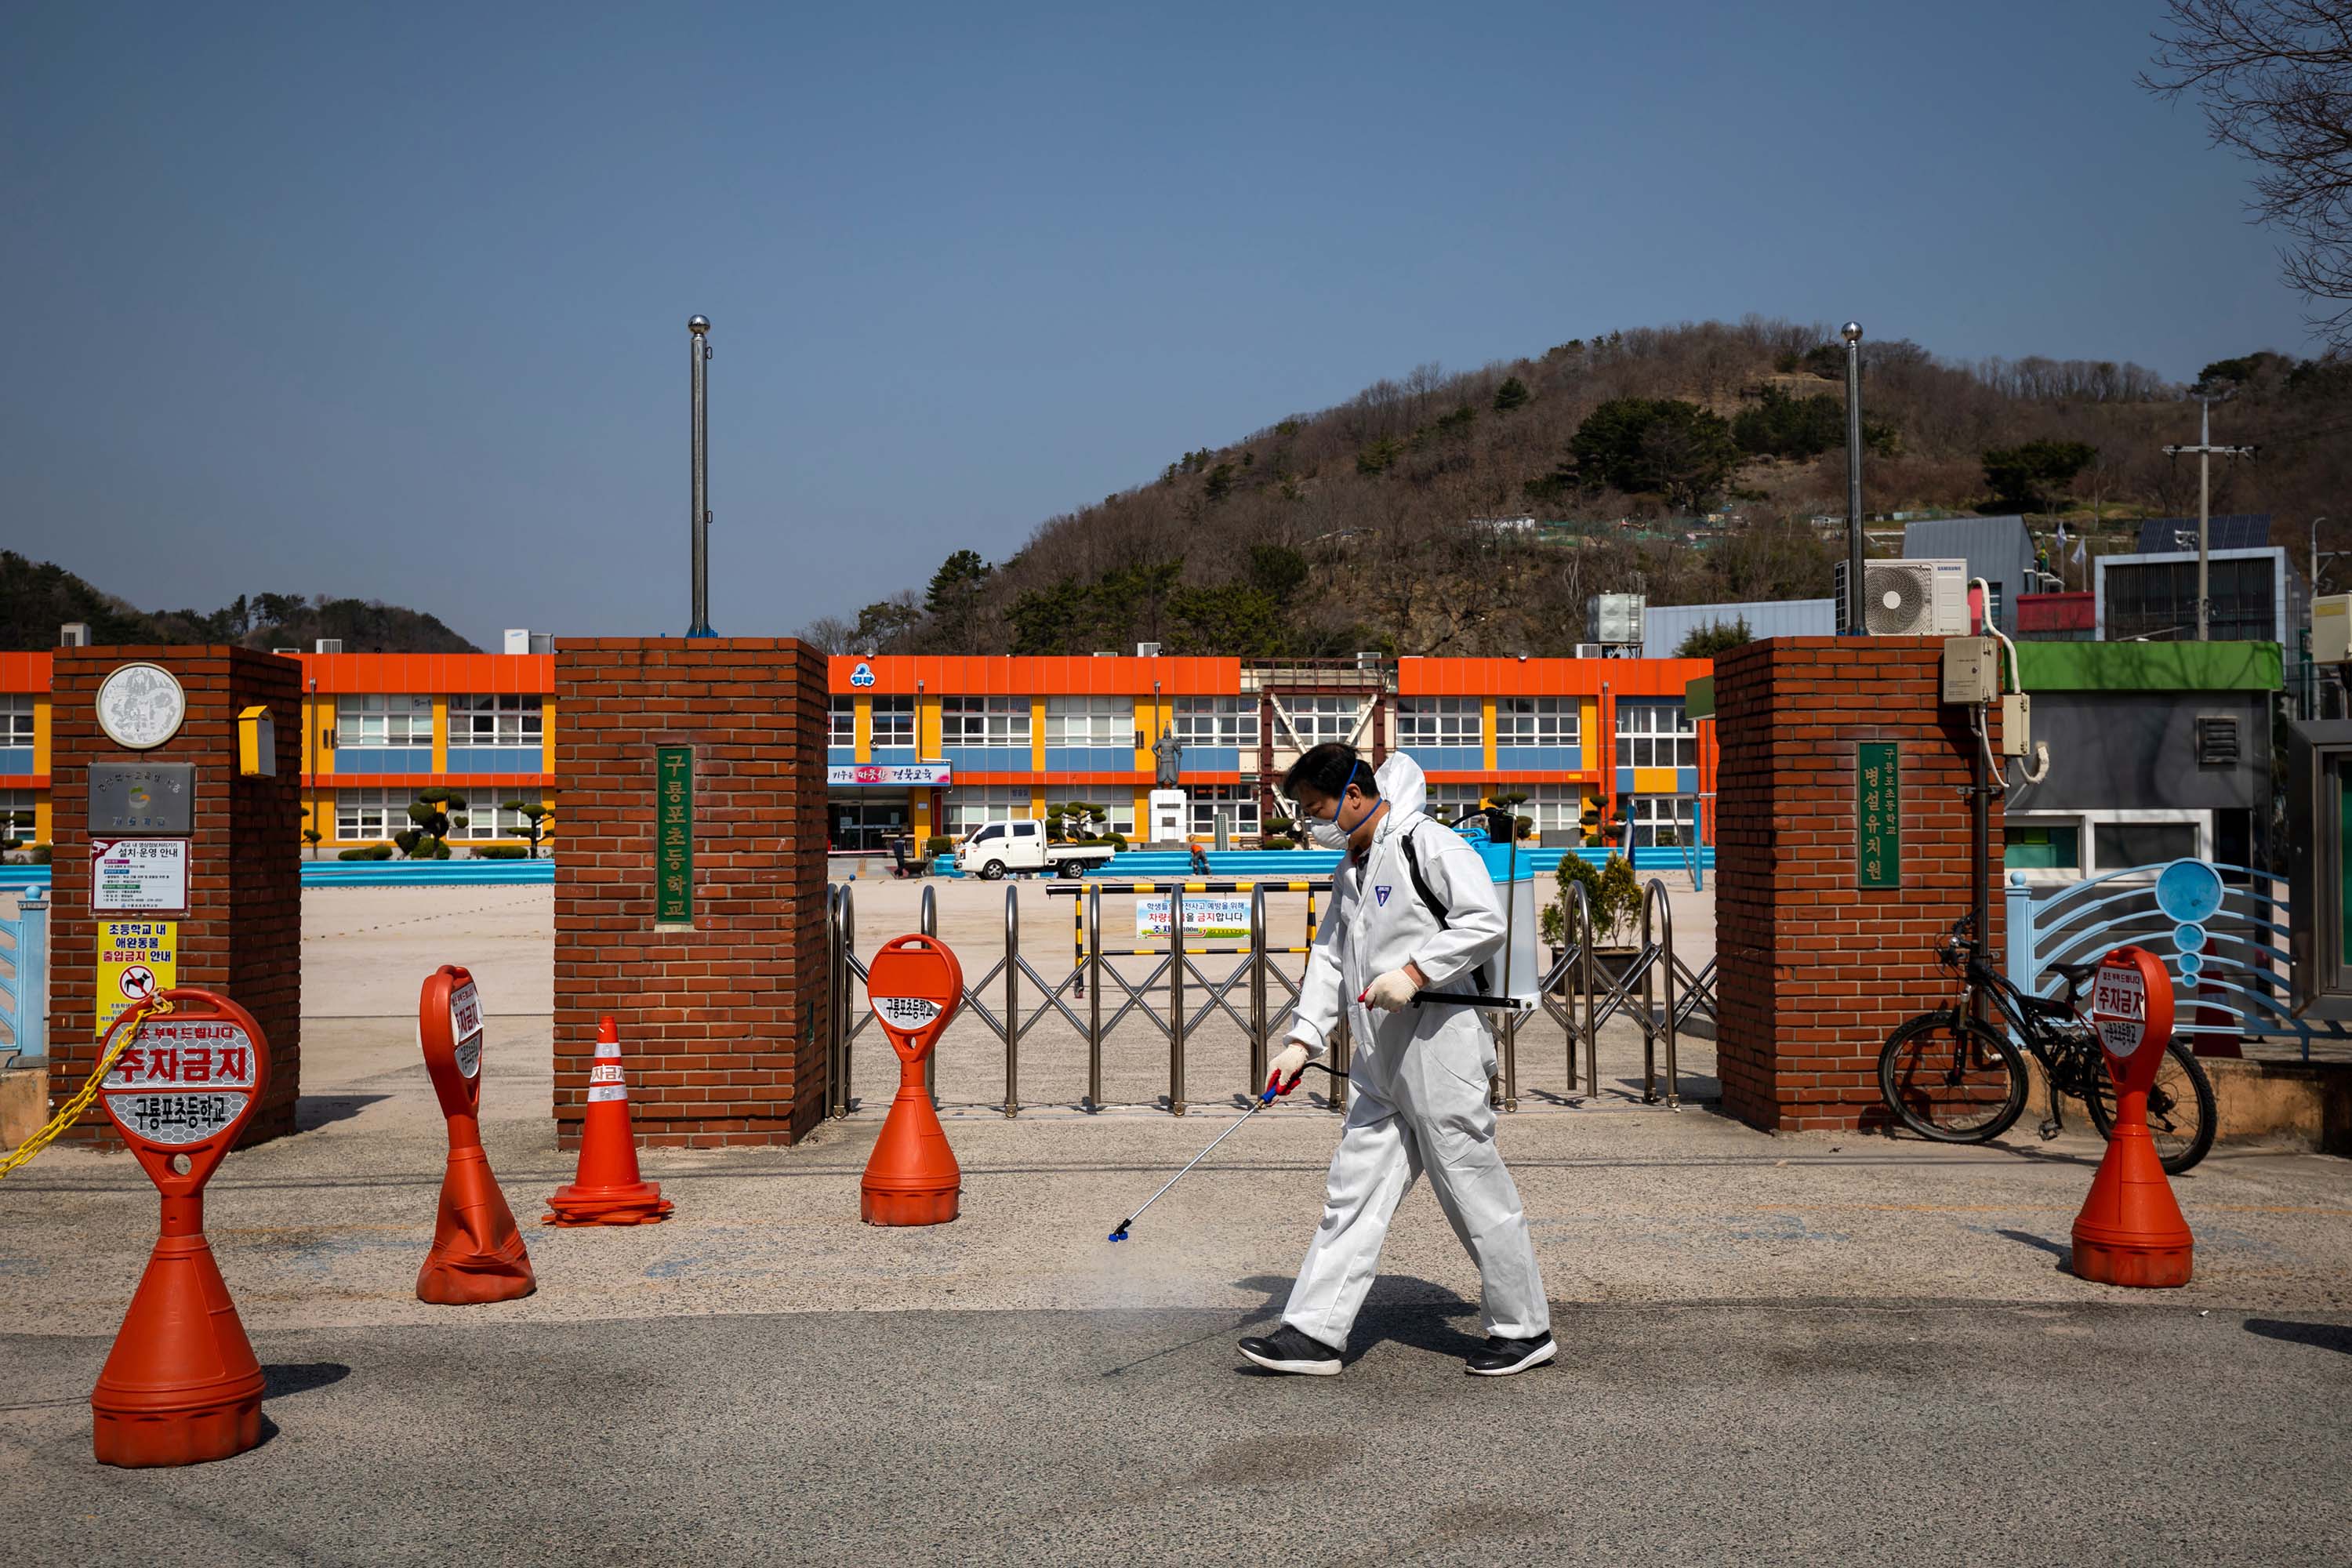 A volunteer sprays disinfectant outside an elementary school in Pohang, South Korea, on March 21.